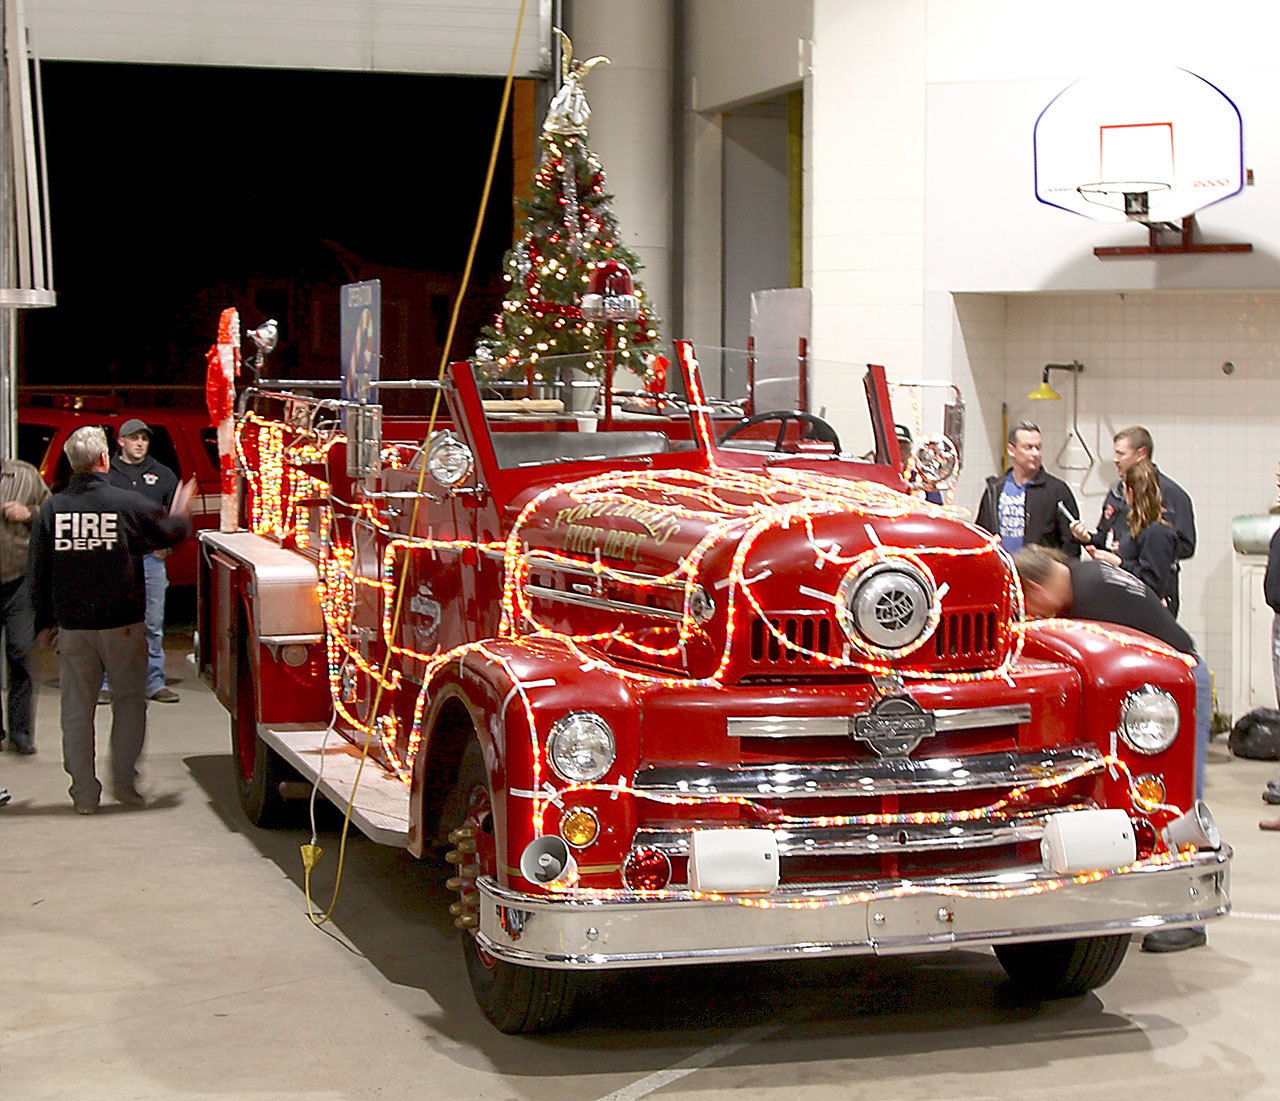 An antique fire engine known as “Sparky” was decorated last year for the Port Angeles Fire Department’s annual Operation Candy Cane. (Dave Logan/for Peninsula Daily News)